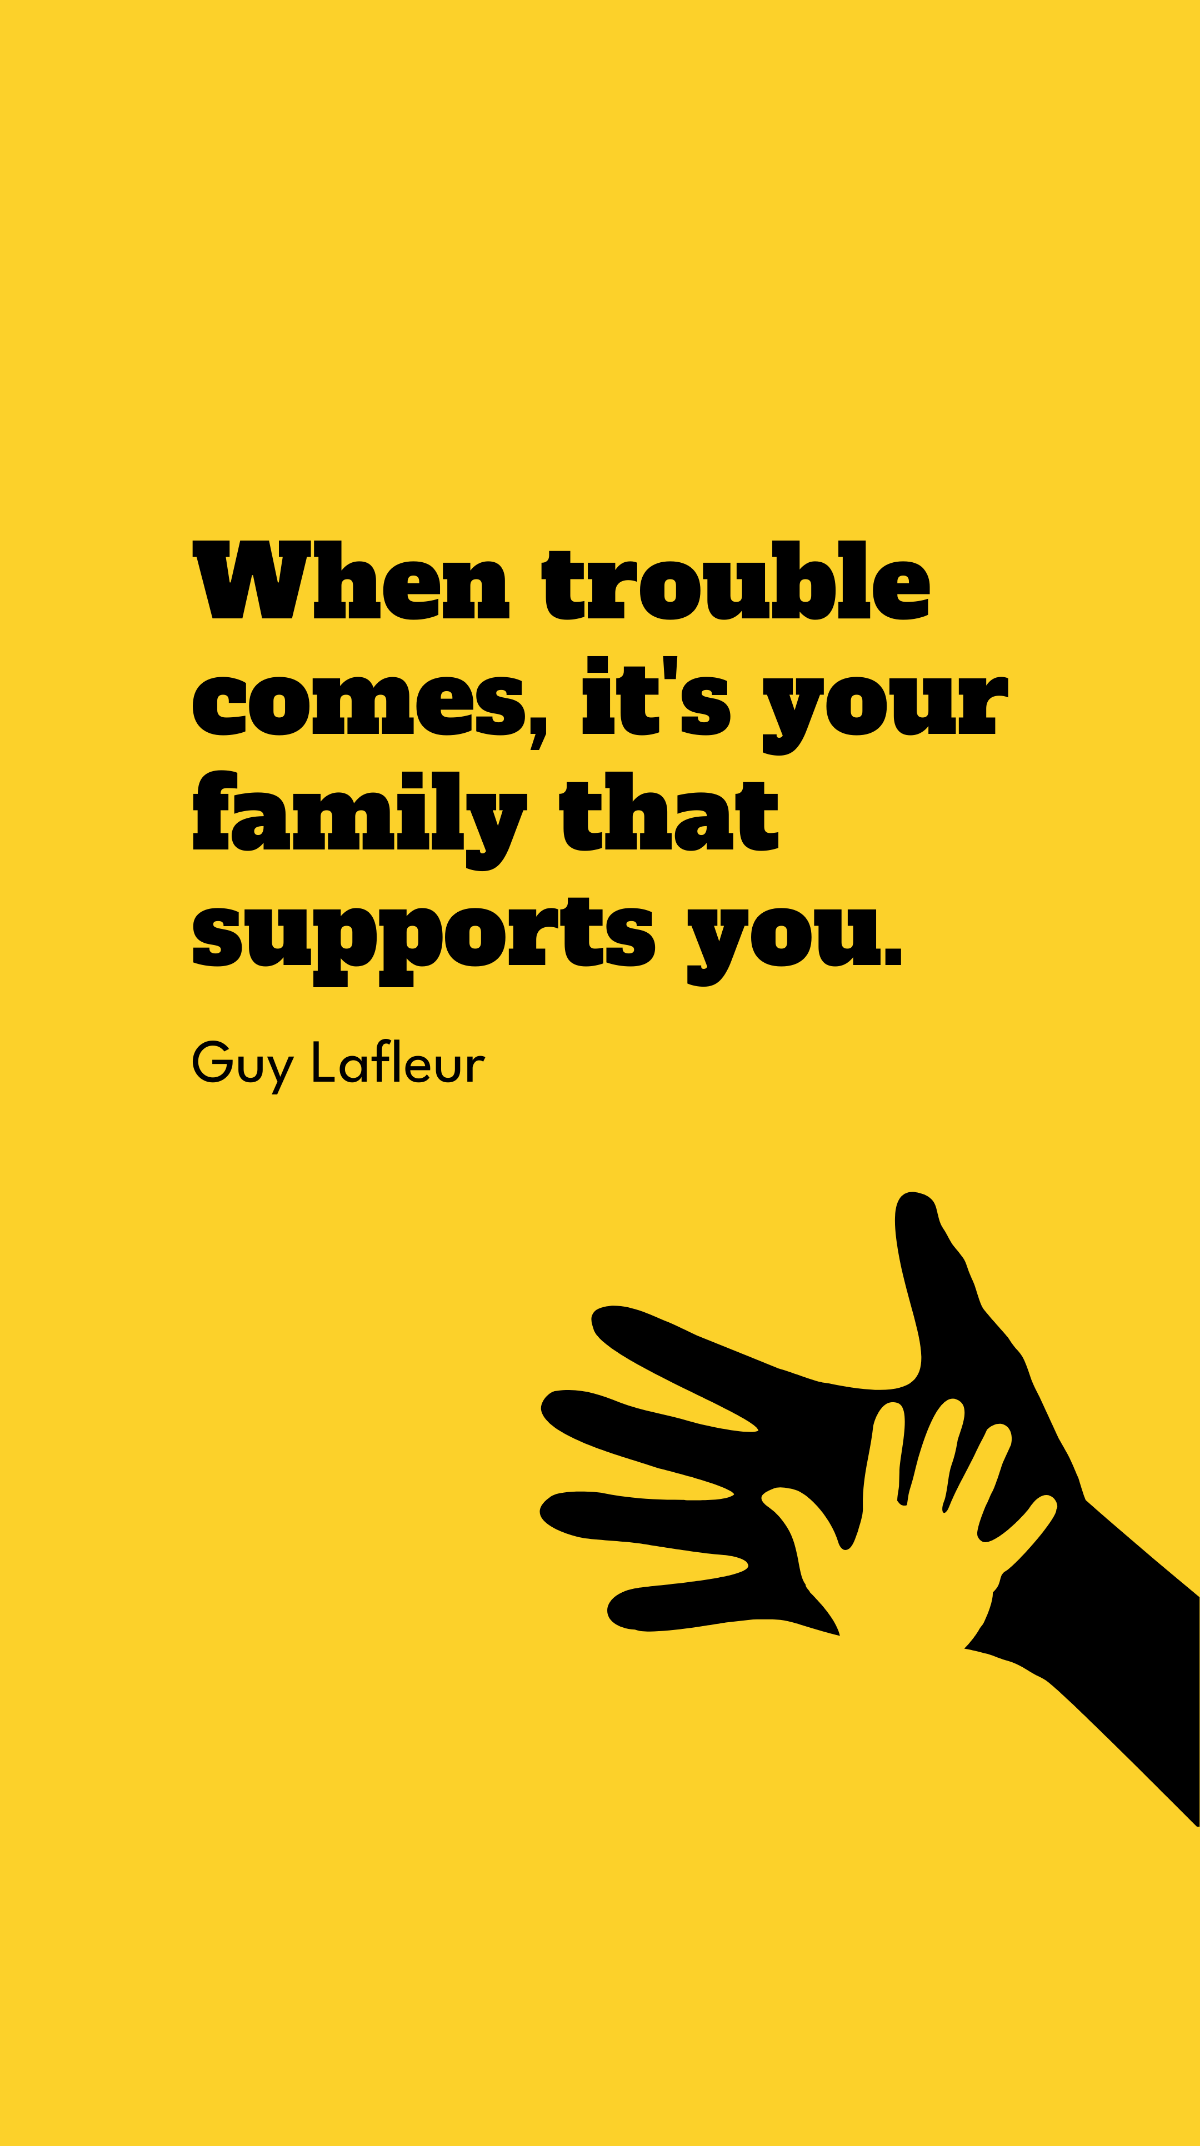 Free Guy Lafleur - When trouble comes, it's your family that supports you. Template